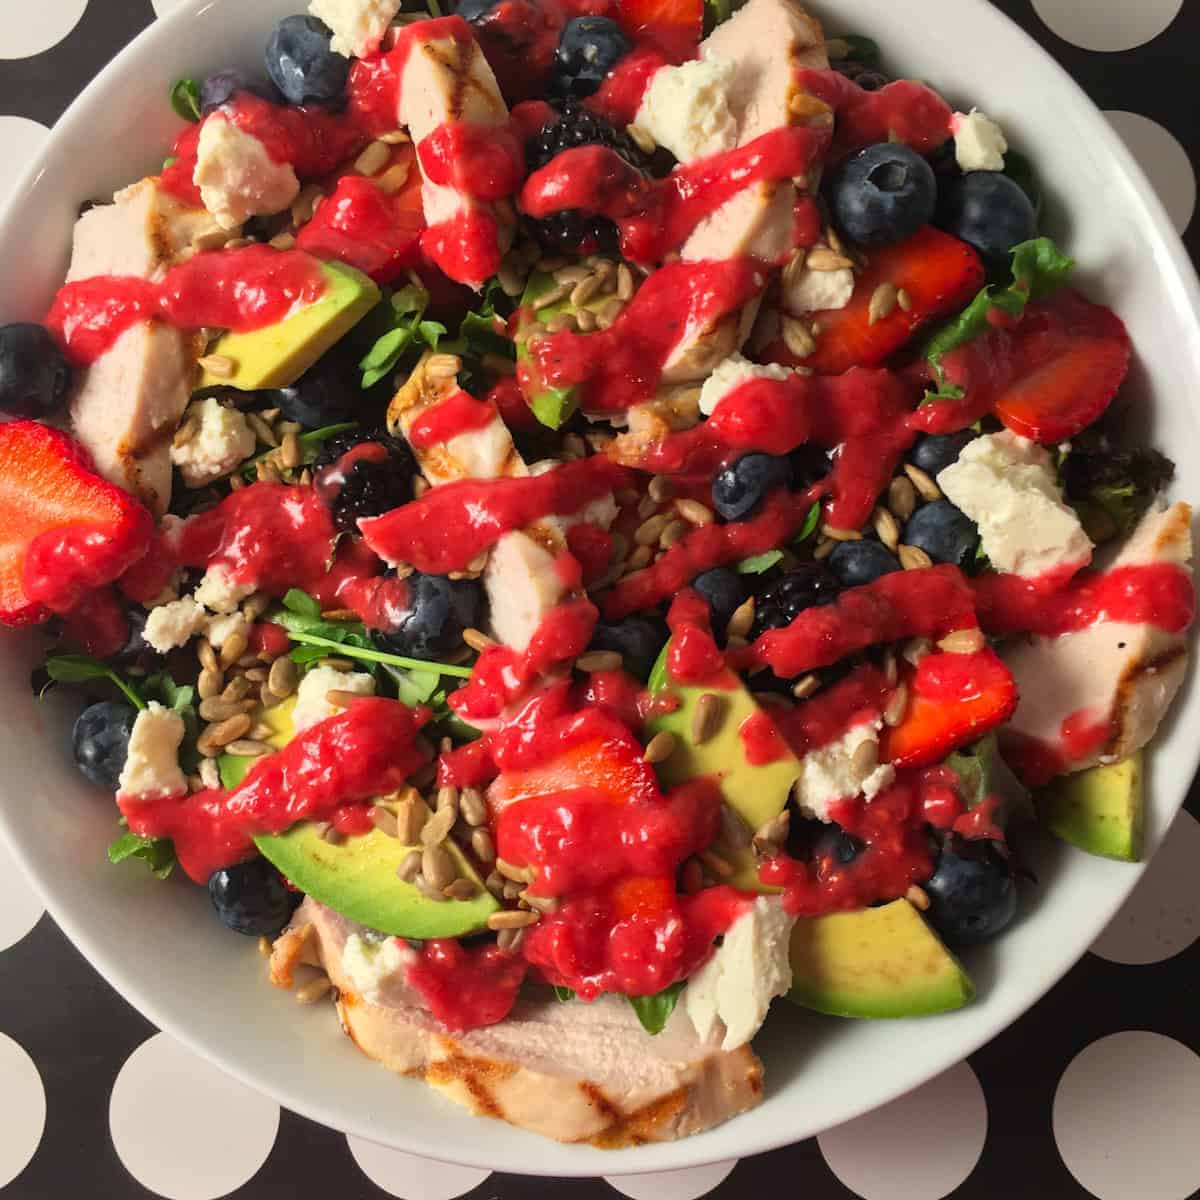 Rotisserie chicken with strawberries, raspberries, black berries and avocado topped with raspberry vinaigrette.